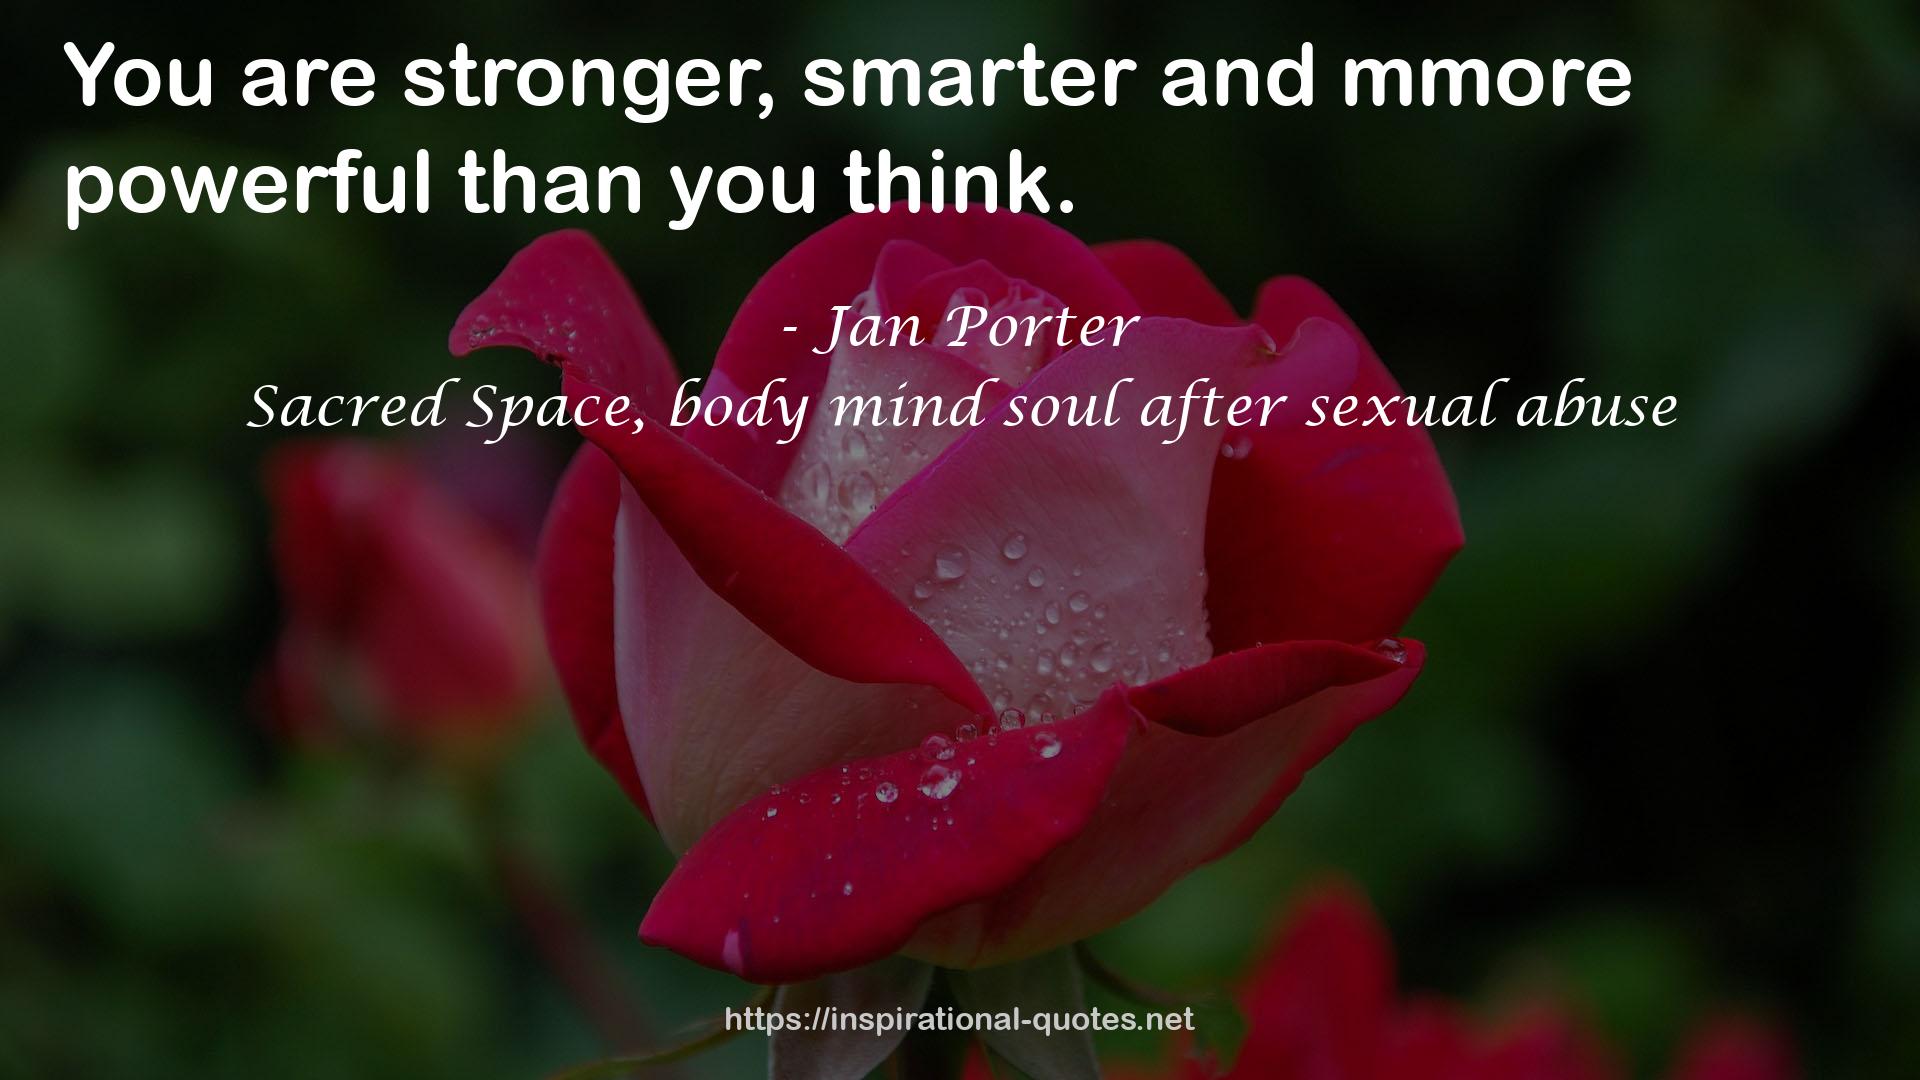 Sacred Space, body mind soul after sexual abuse QUOTES